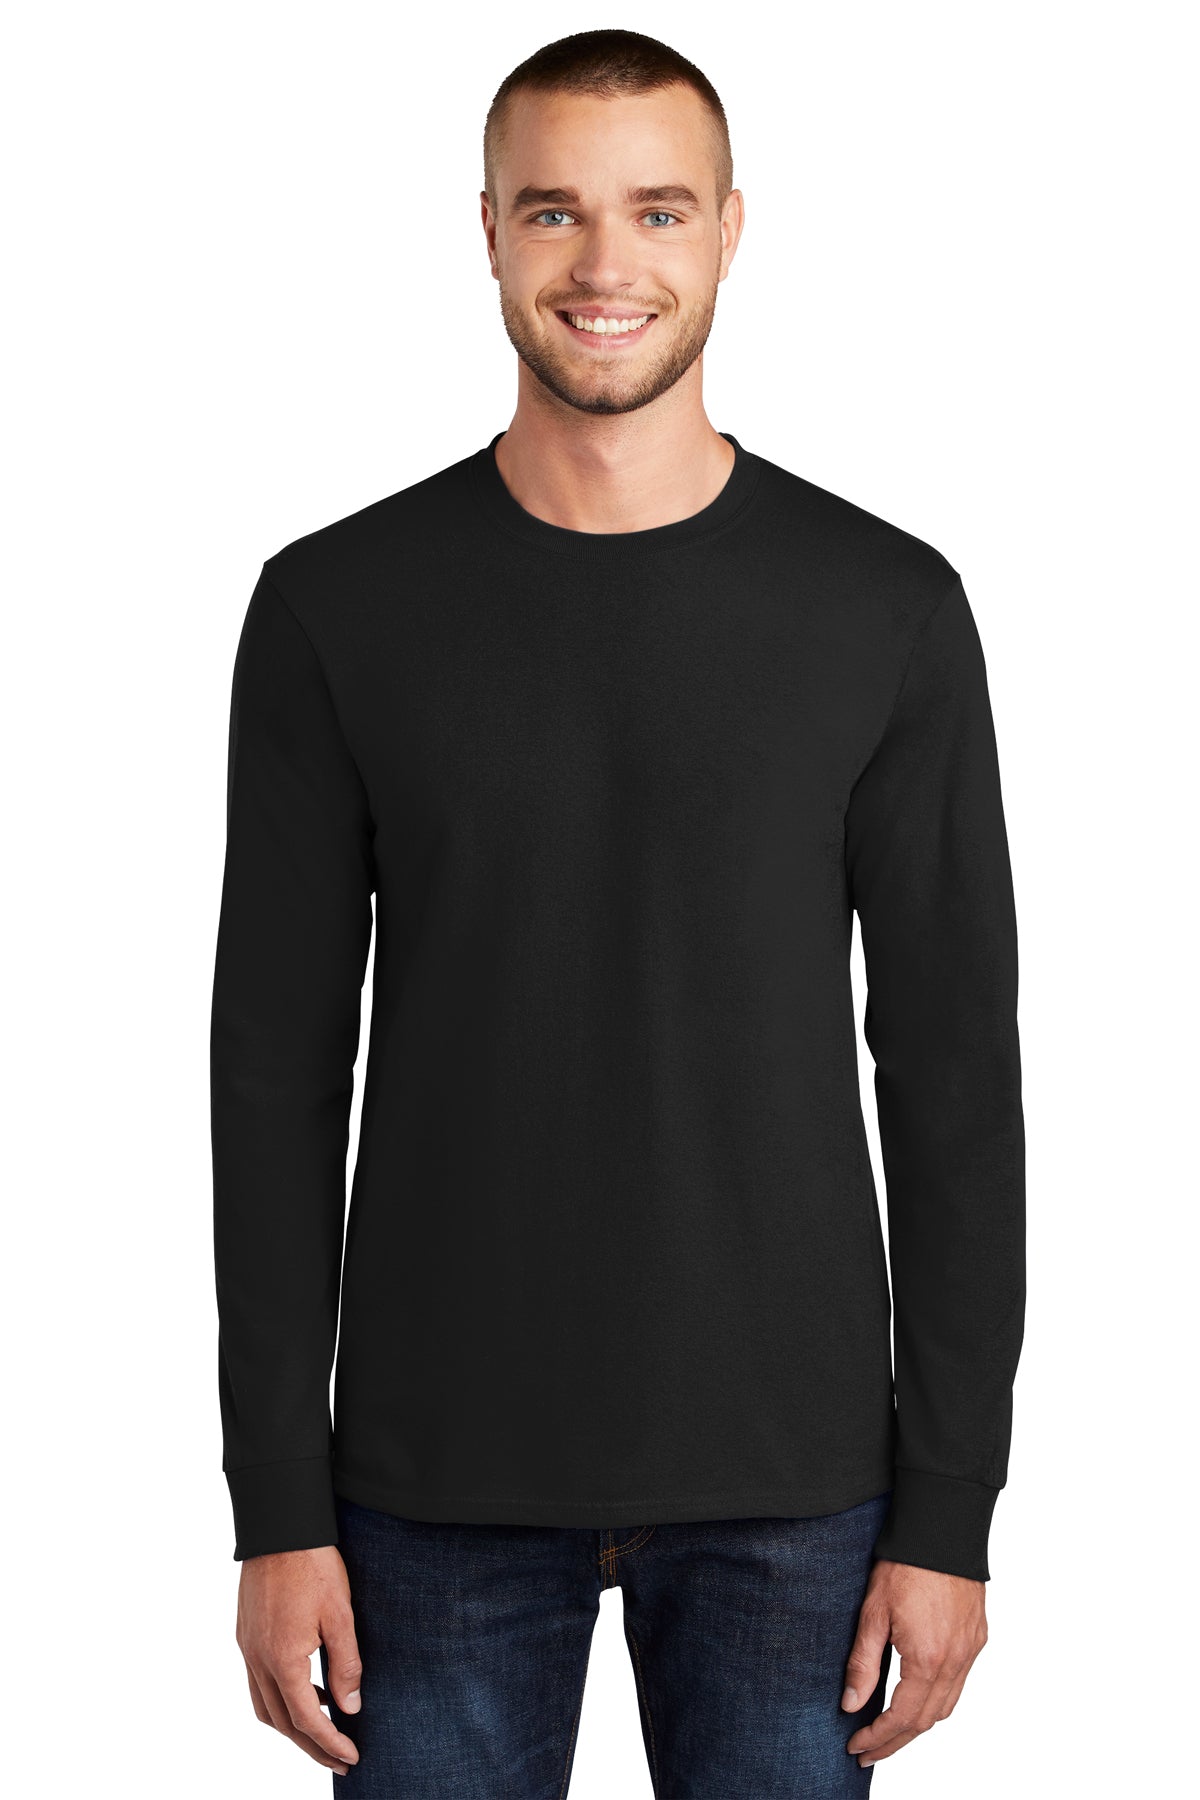 Port & Company Essential Pocket Tee, Product